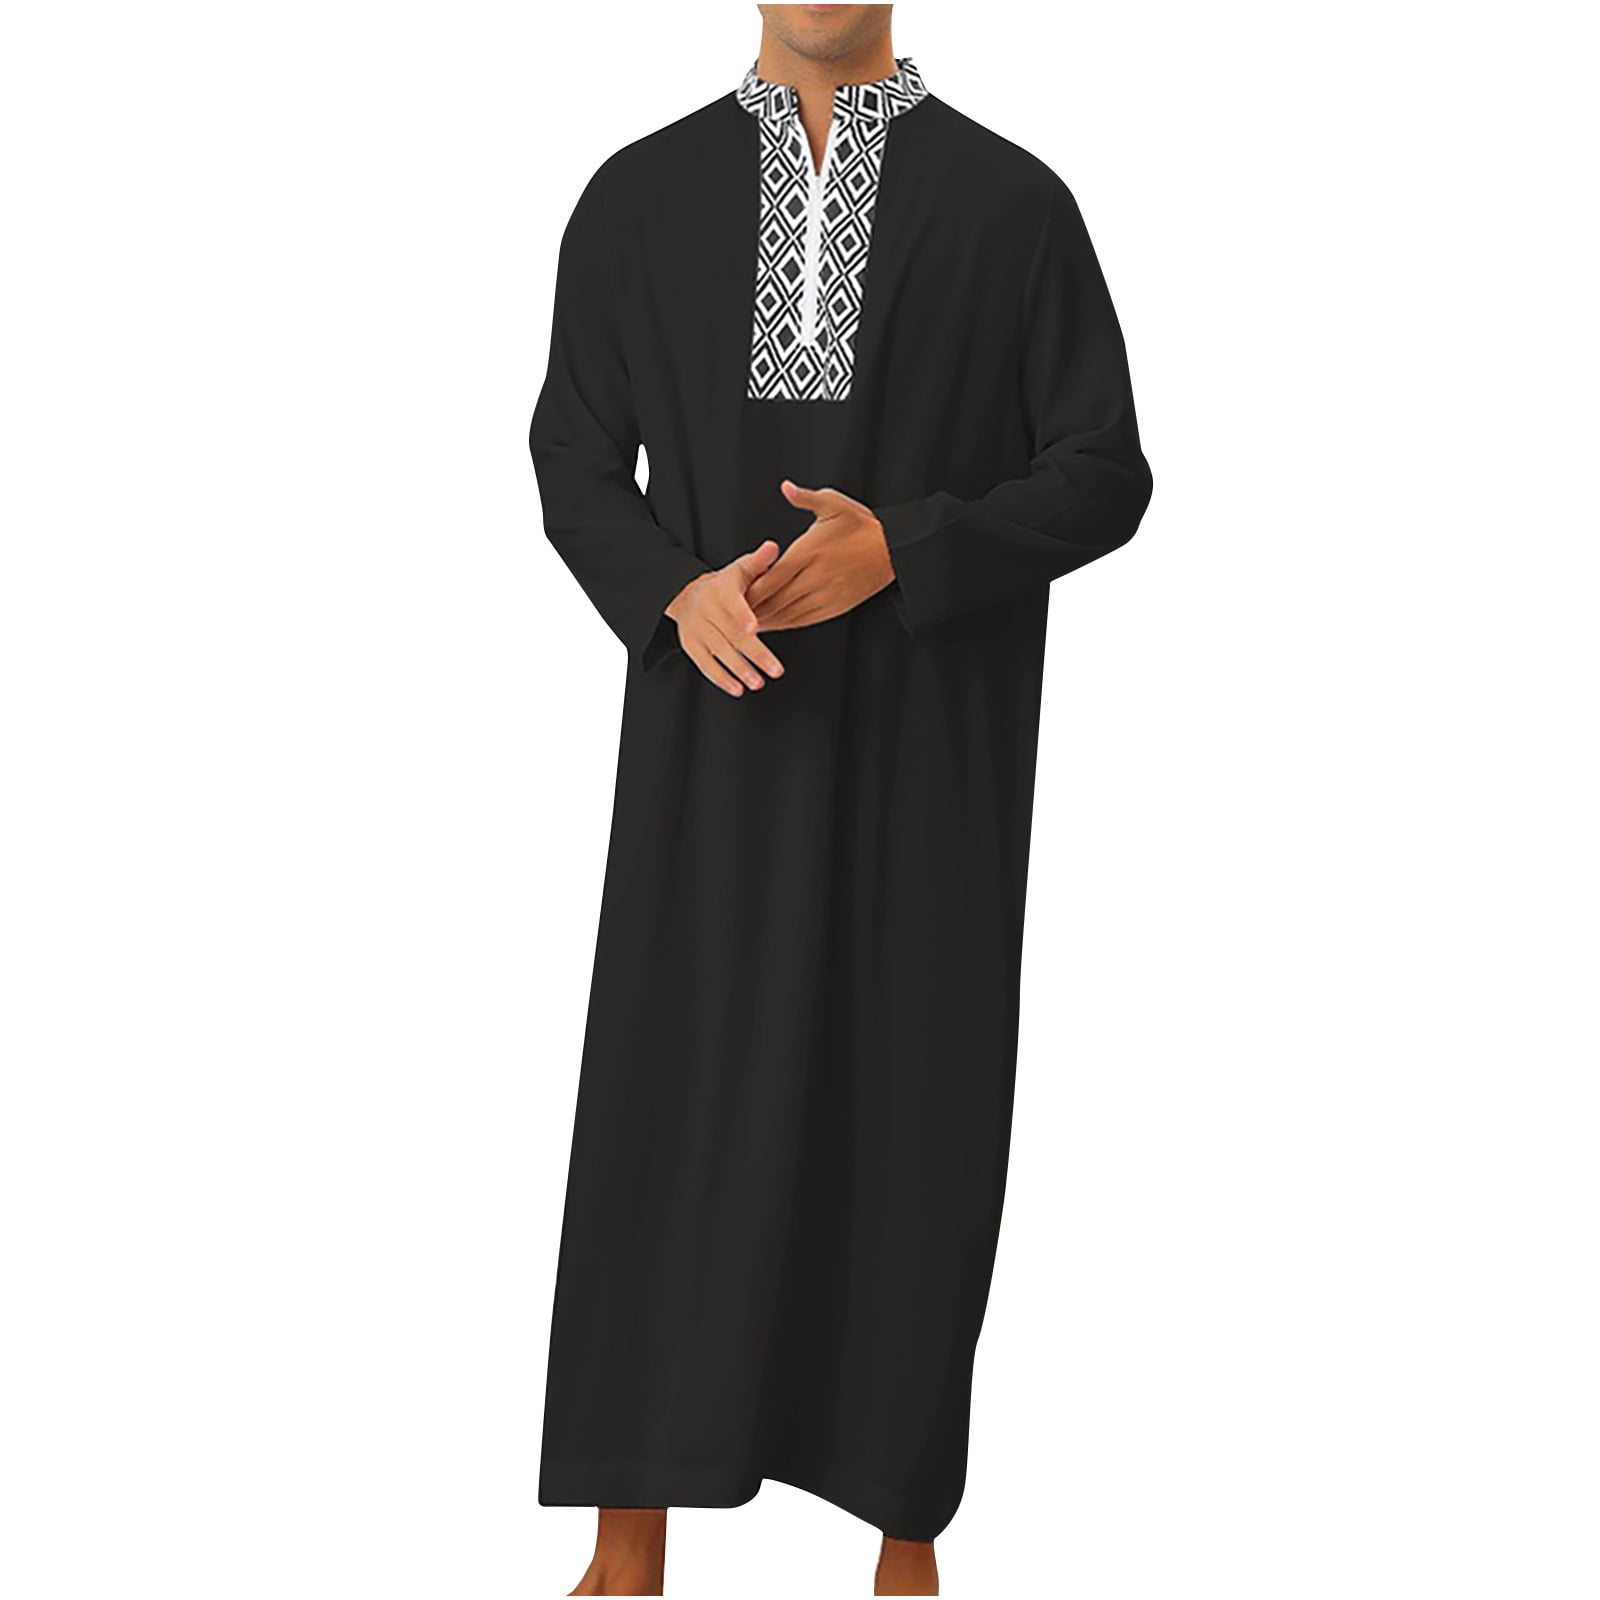 Lilgiuy Men's Muslim Robe With Edges Black White Stripes Long Sleeves  V-neck Casual Arabic Style Robe for Camping Hiking Fishing 